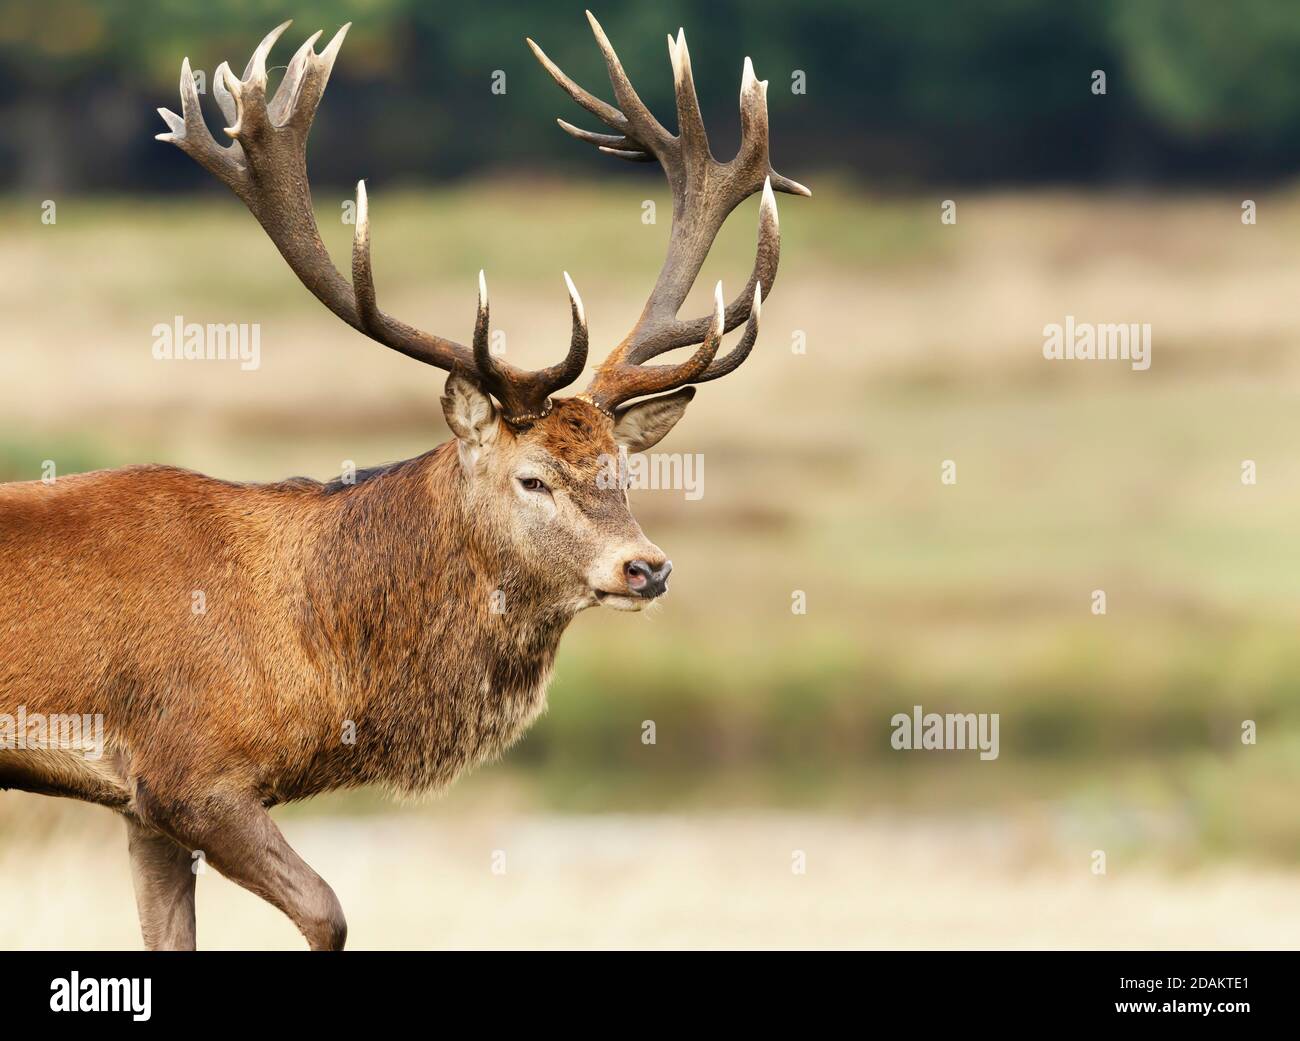 Close up of a Red Deer during rutting season in autumn, UK. Stock Photo